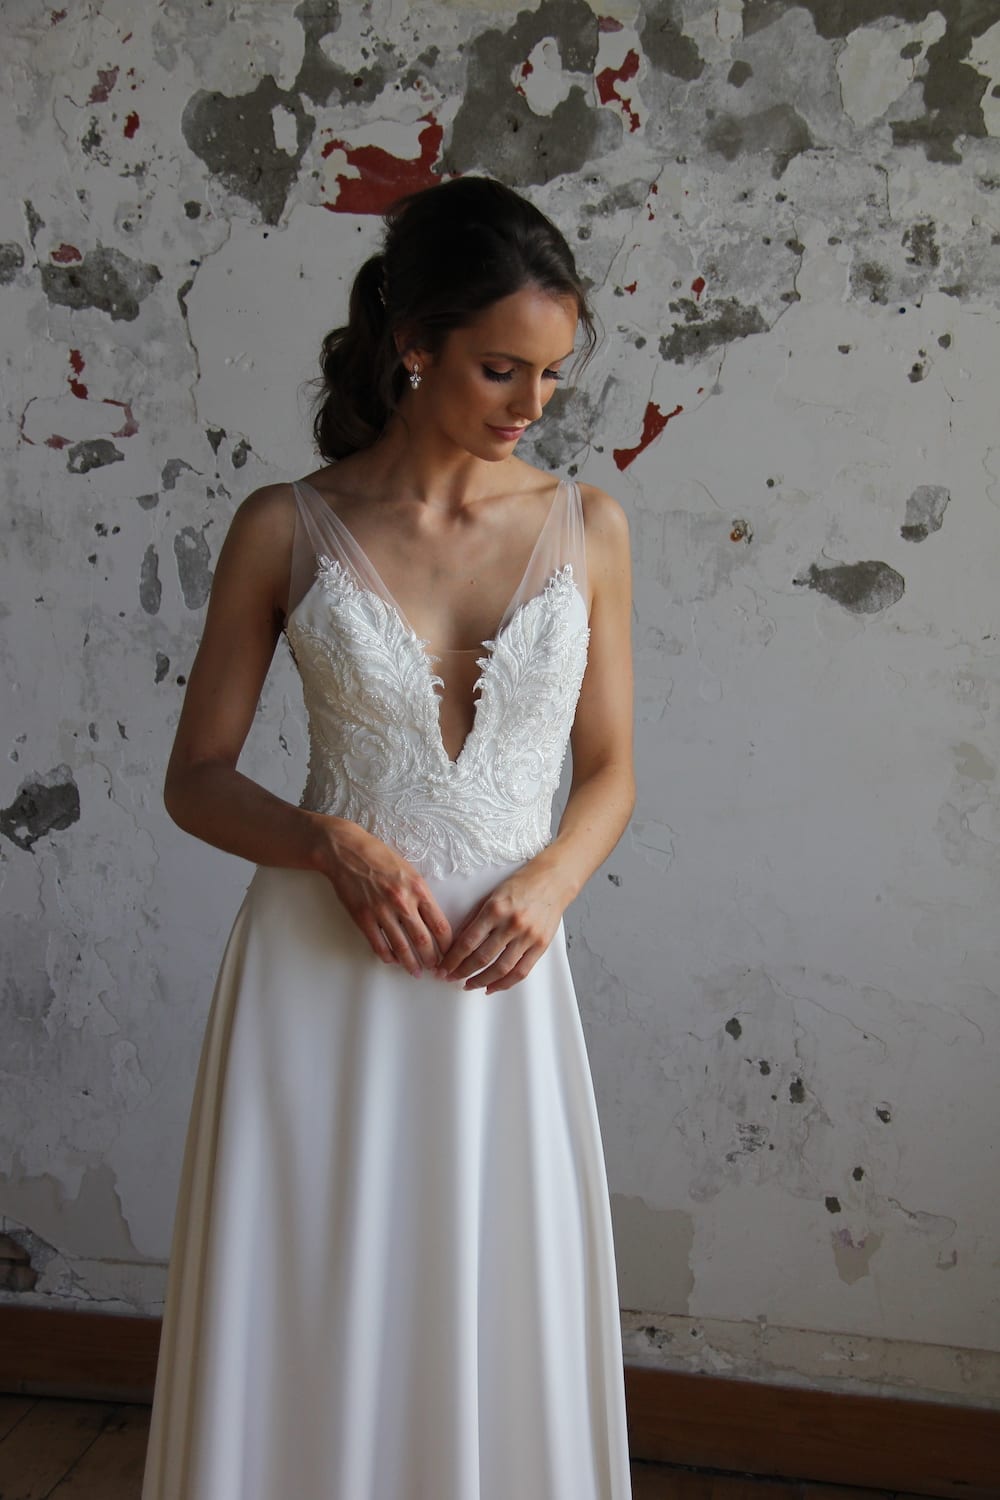 Female model wearing Vinka Design Modern Muse Wedding Dress. In chic warehouse the front detail of a gown with beaded lace and tulle bodice and bridal crepe skirt with train.